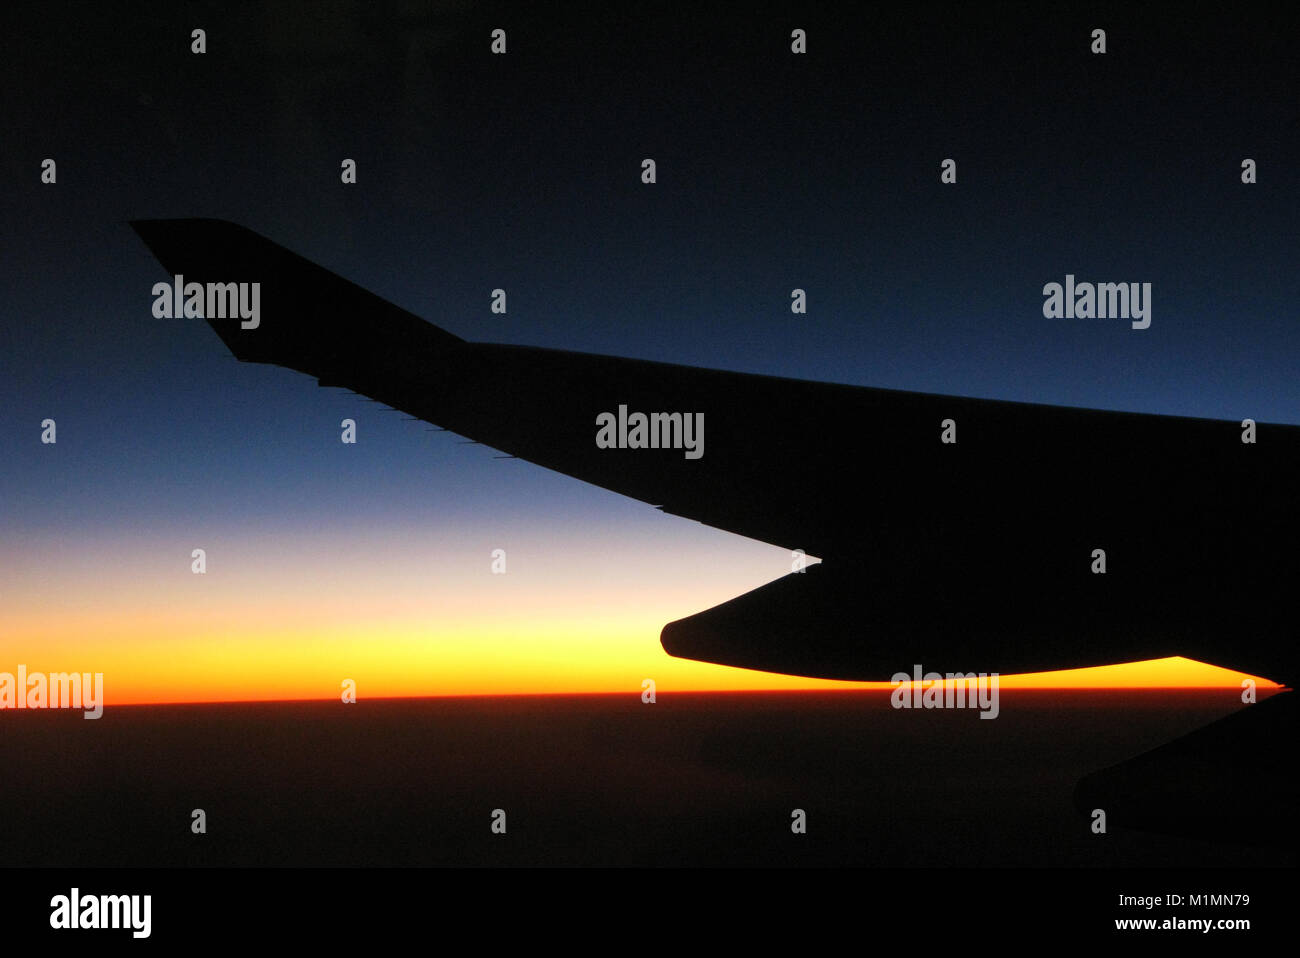 Dawn/ sunrise from 35,000 feet, including plane wing Stock Photo